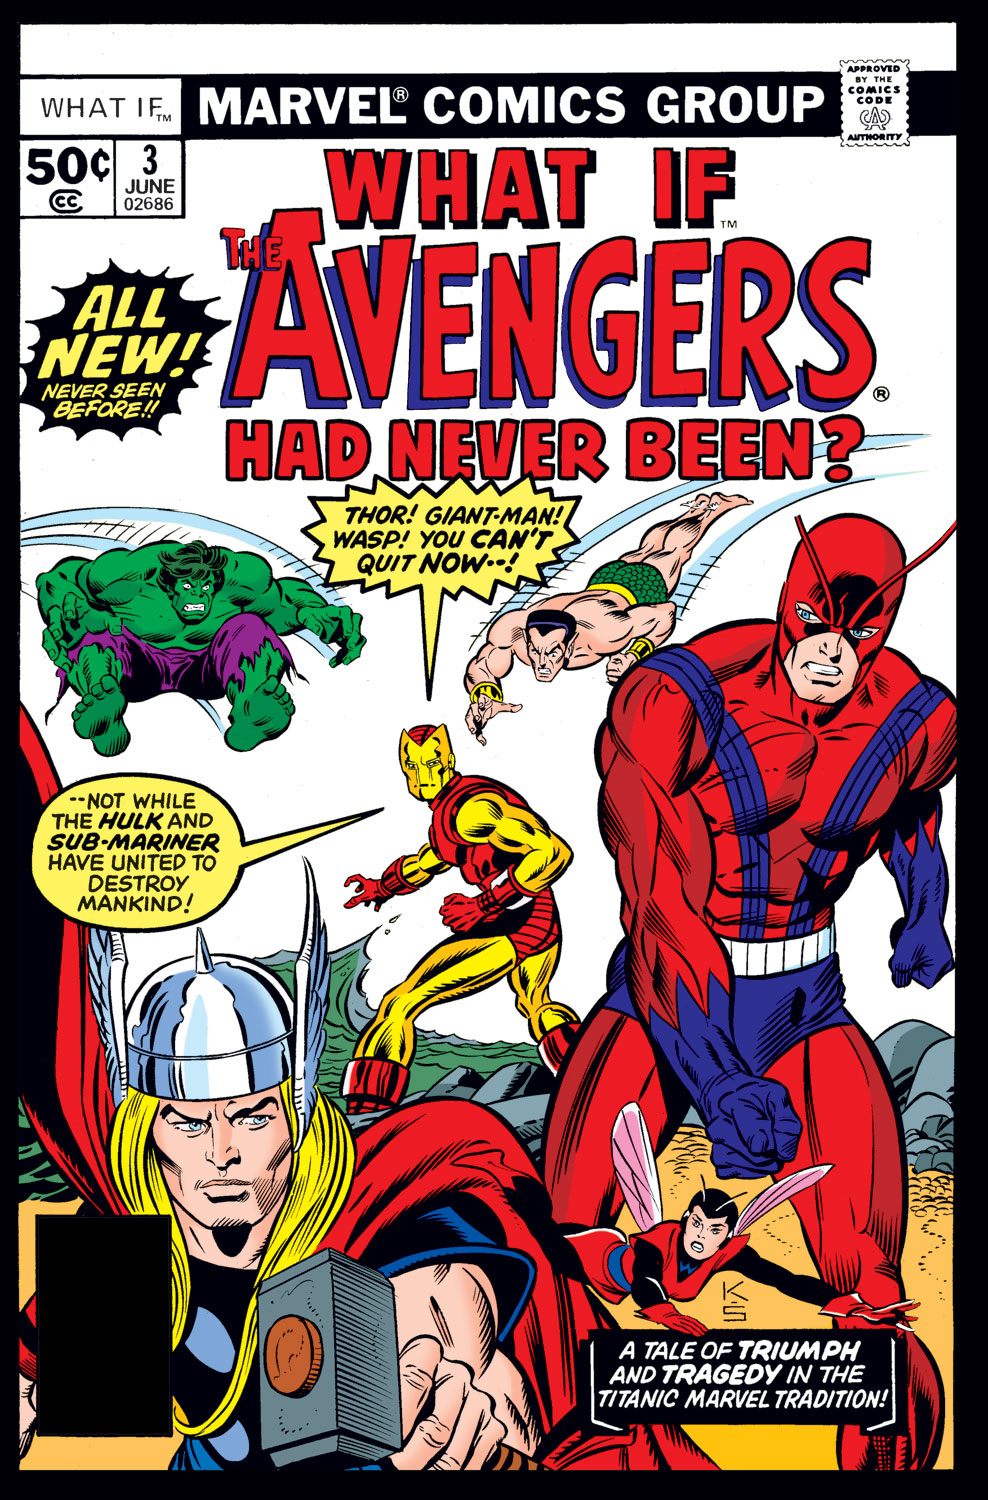 What If? (1977) Issue #3 - The Avengers had never been #3 - English 1